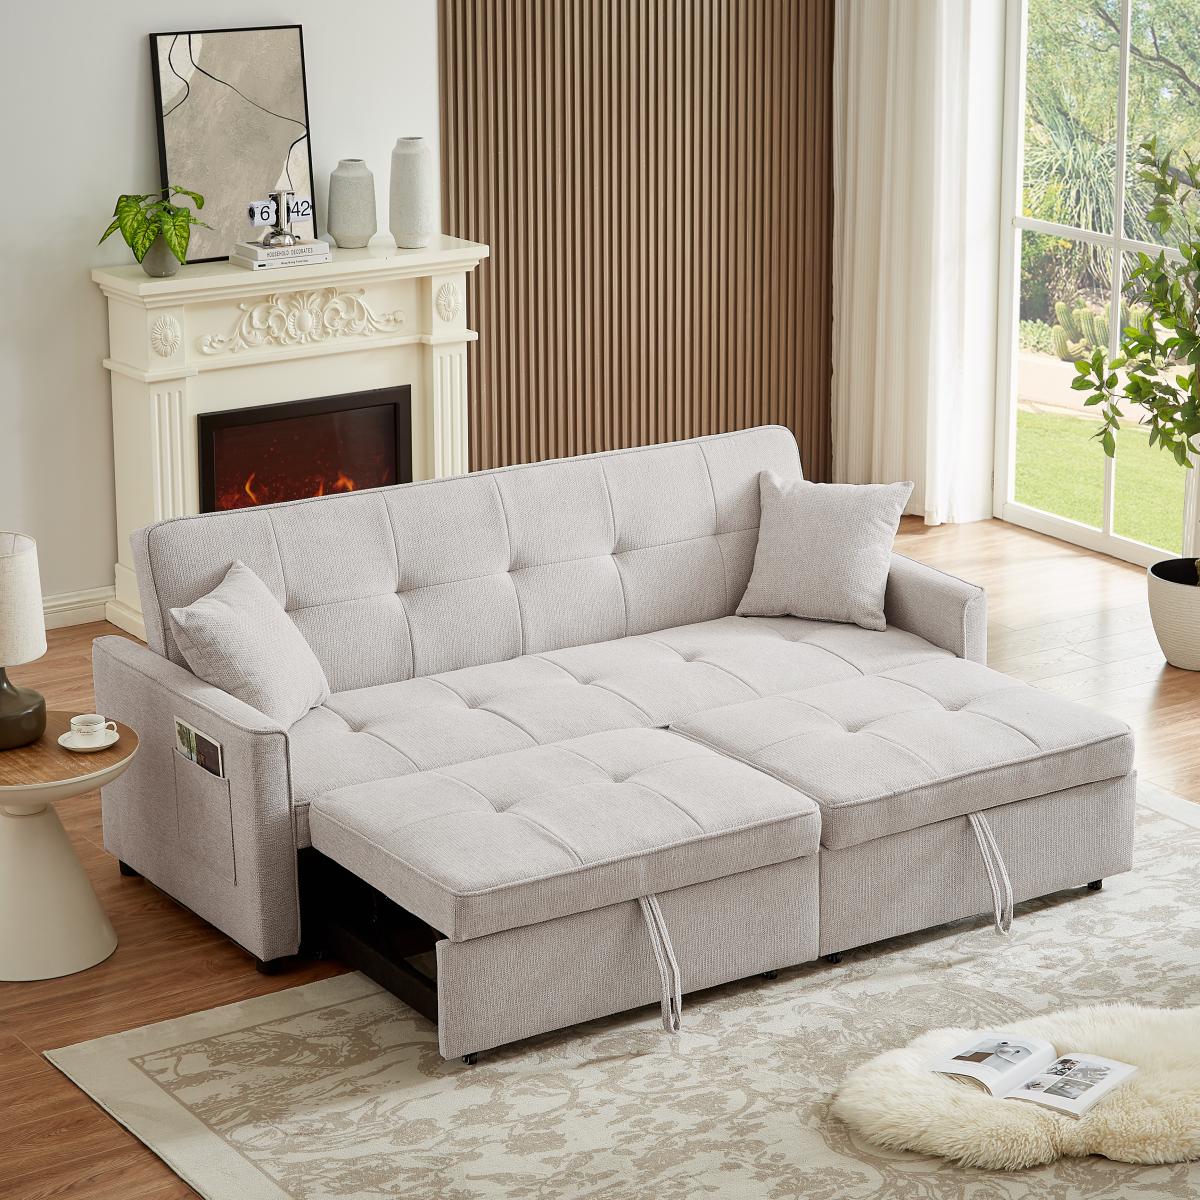 83.47-Inch large size Ivory Fabric 3 in 1 Convertible Sleeper Sofa Bed, for Living Room, Bedroom, Apartment, Office